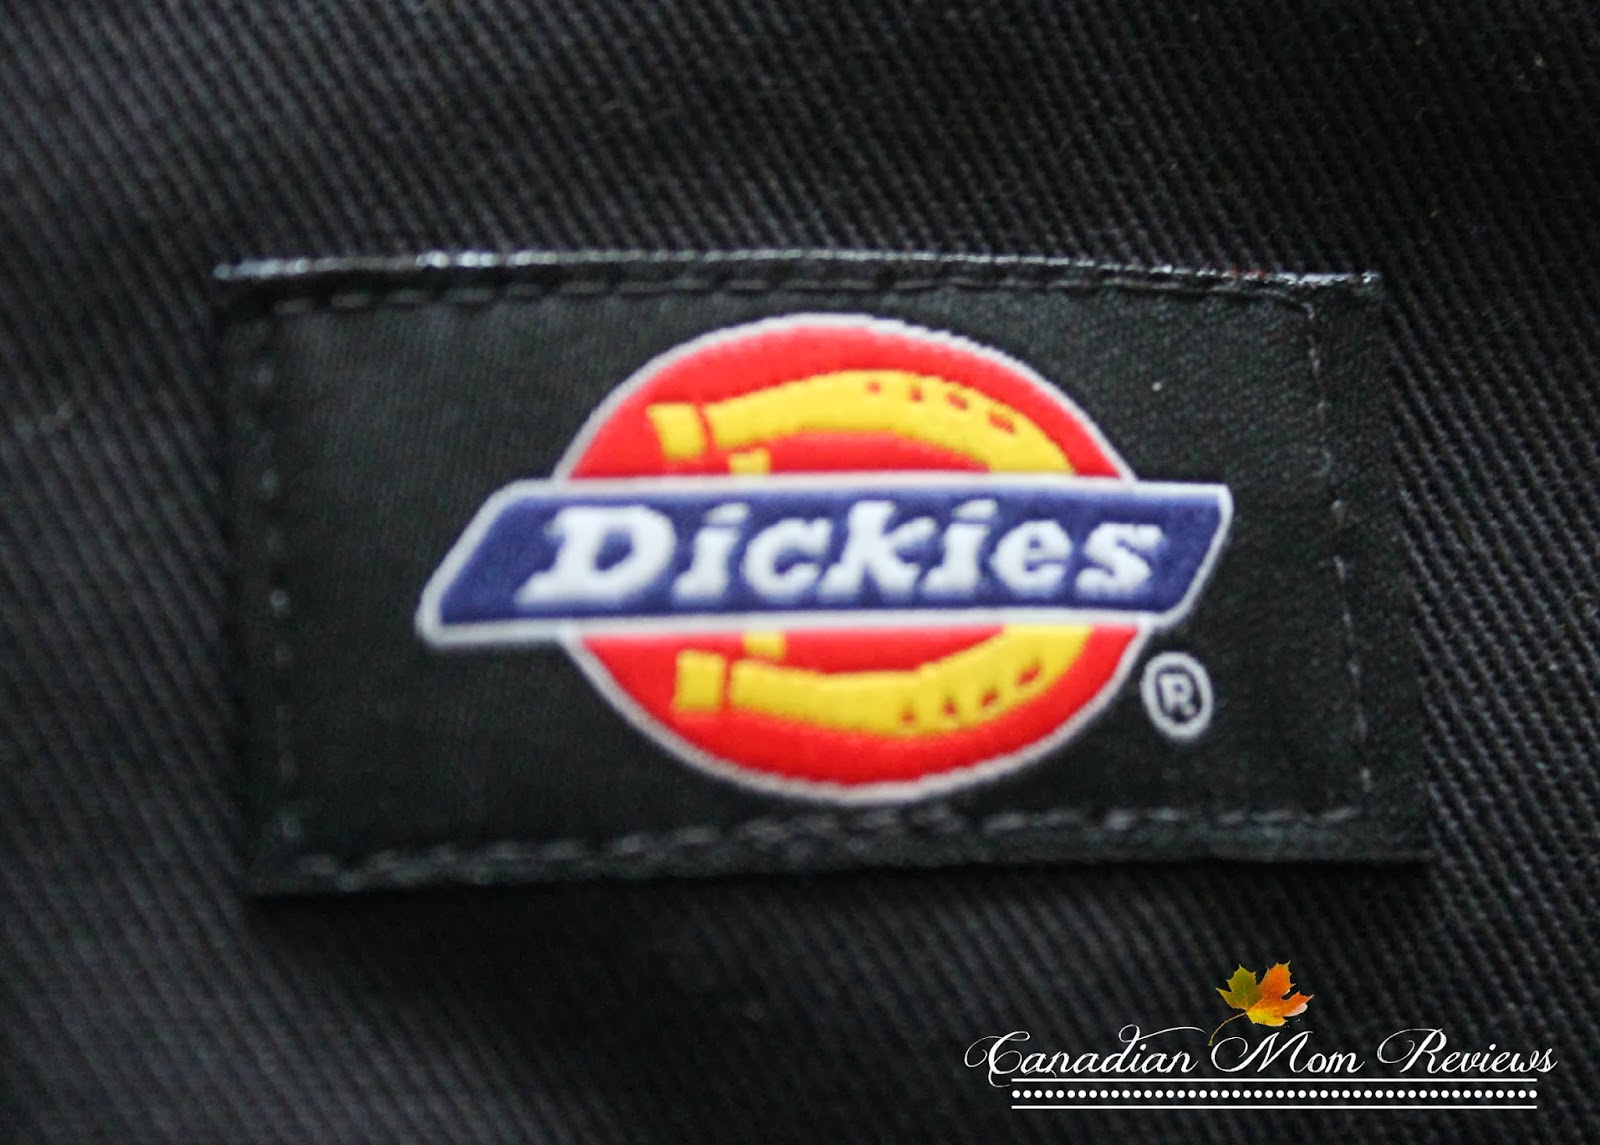 Dickies Workwear: Not your average work clothes – Review